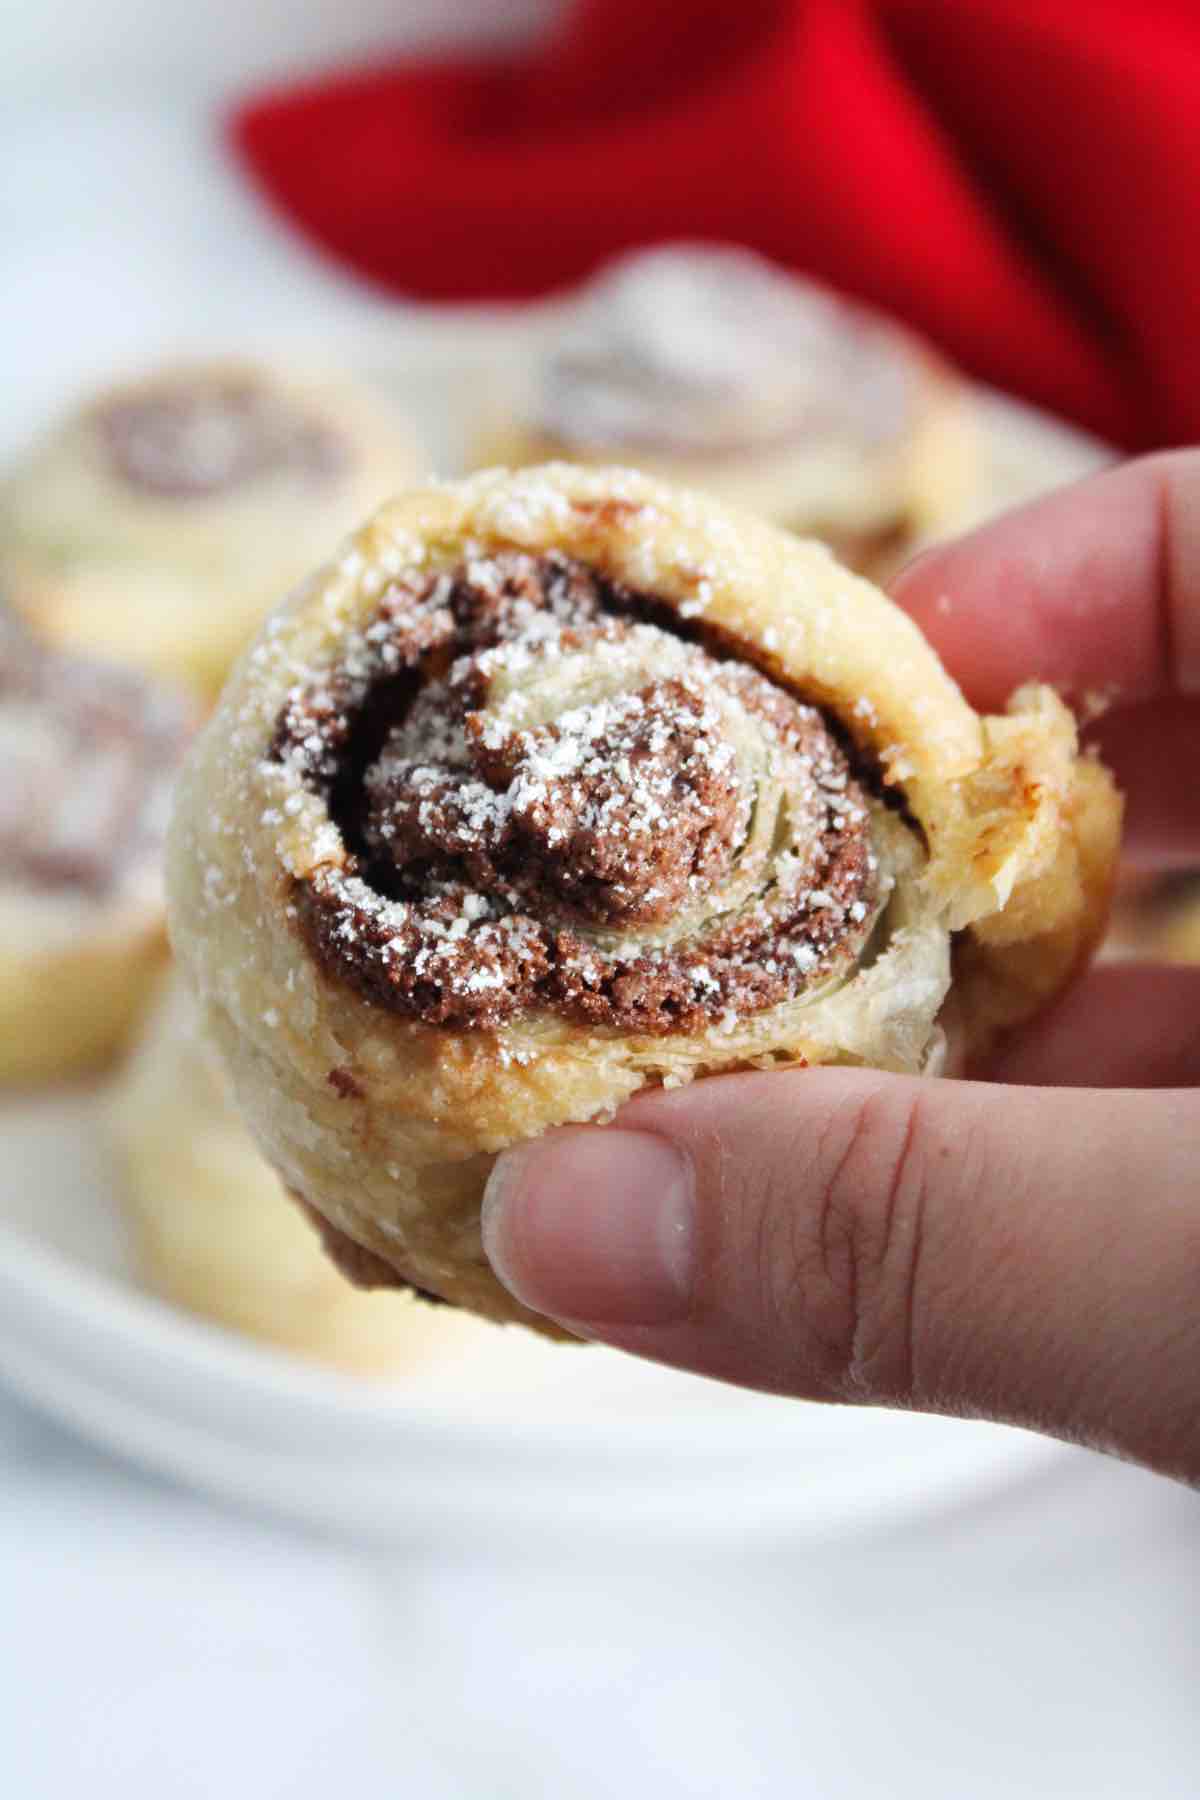 Baked Nutella pinwheels are made with puff pastry sheets and this is an up close look at them.